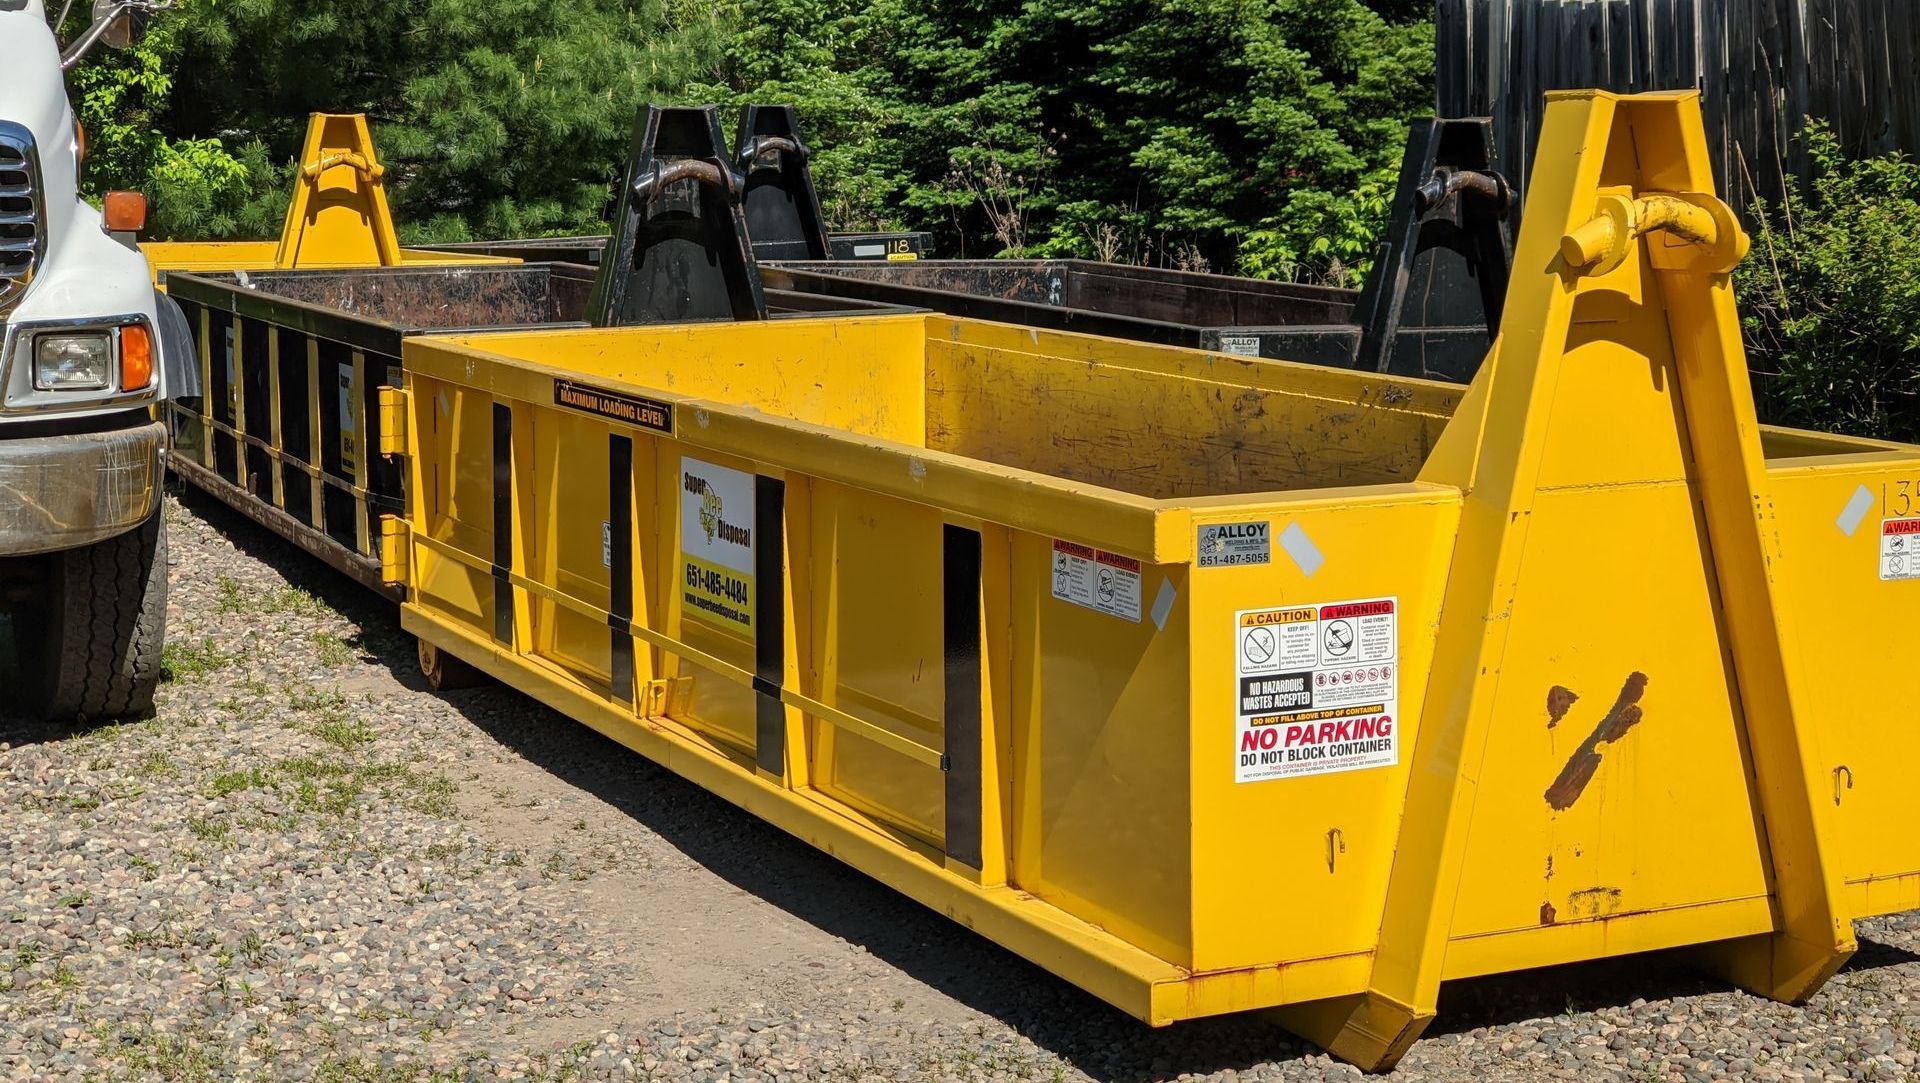 a yellow dumpster has a no parking sign on it